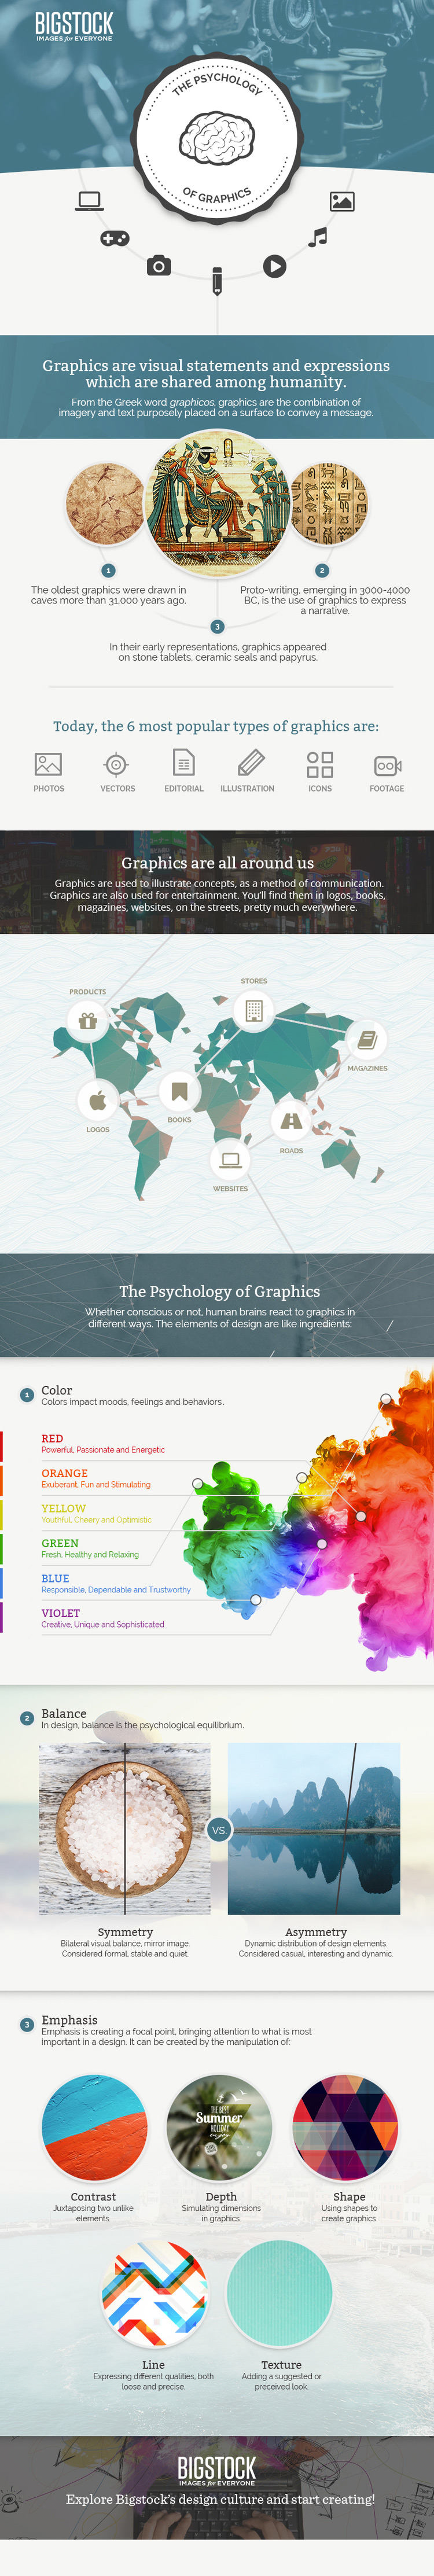 infographic-the-psychology-of-graphics